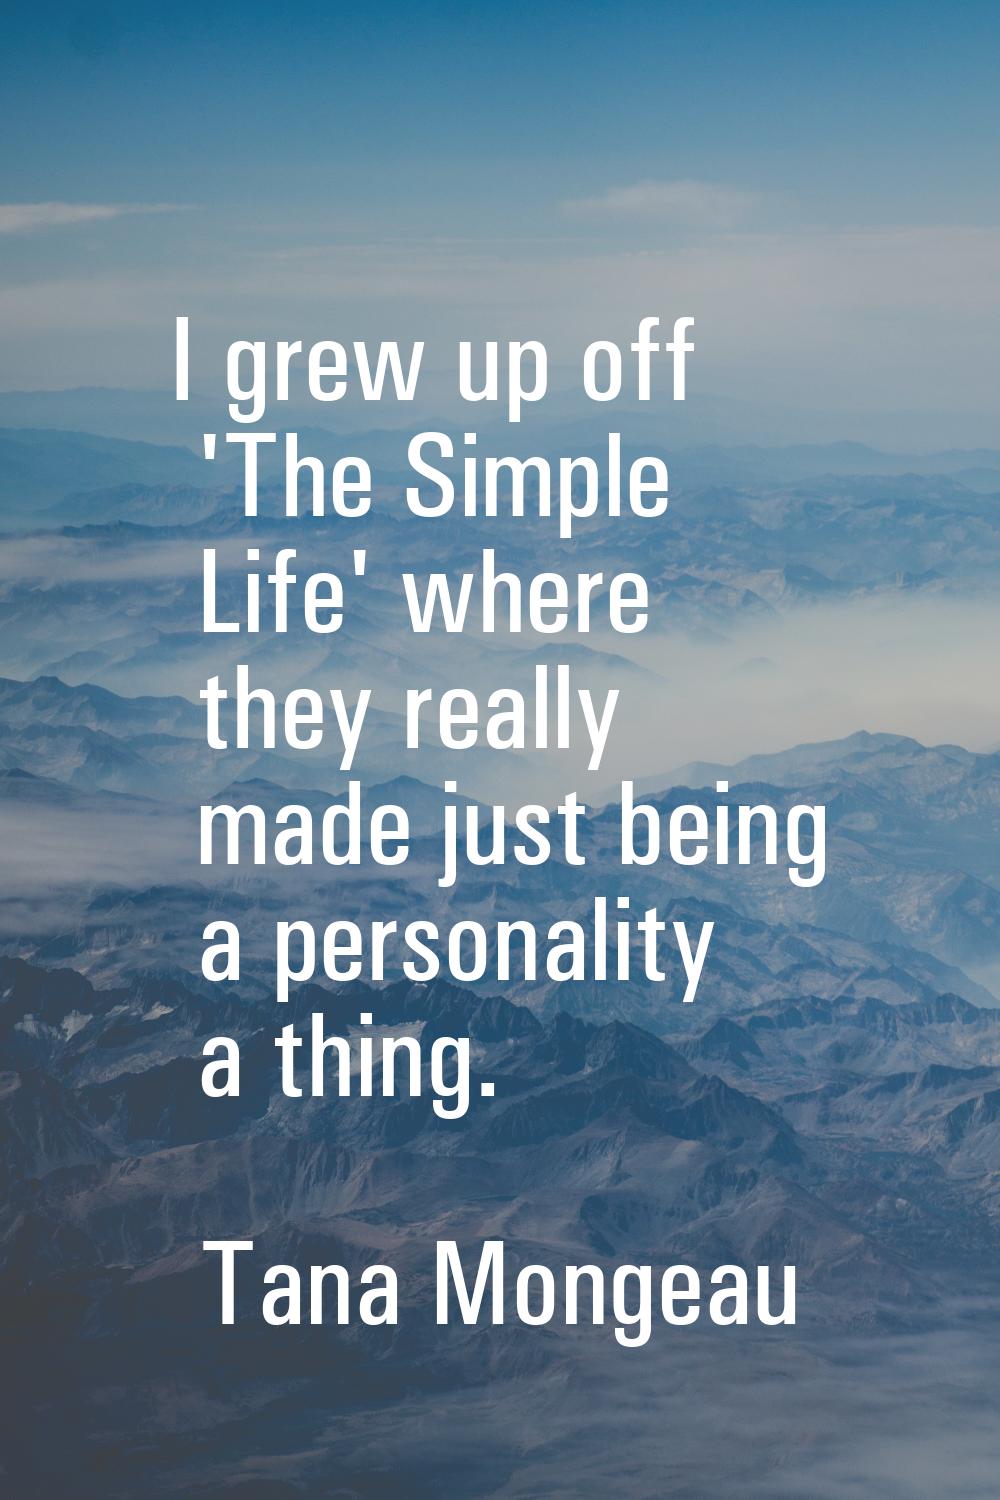 I grew up off 'The Simple Life' where they really made just being a personality a thing.